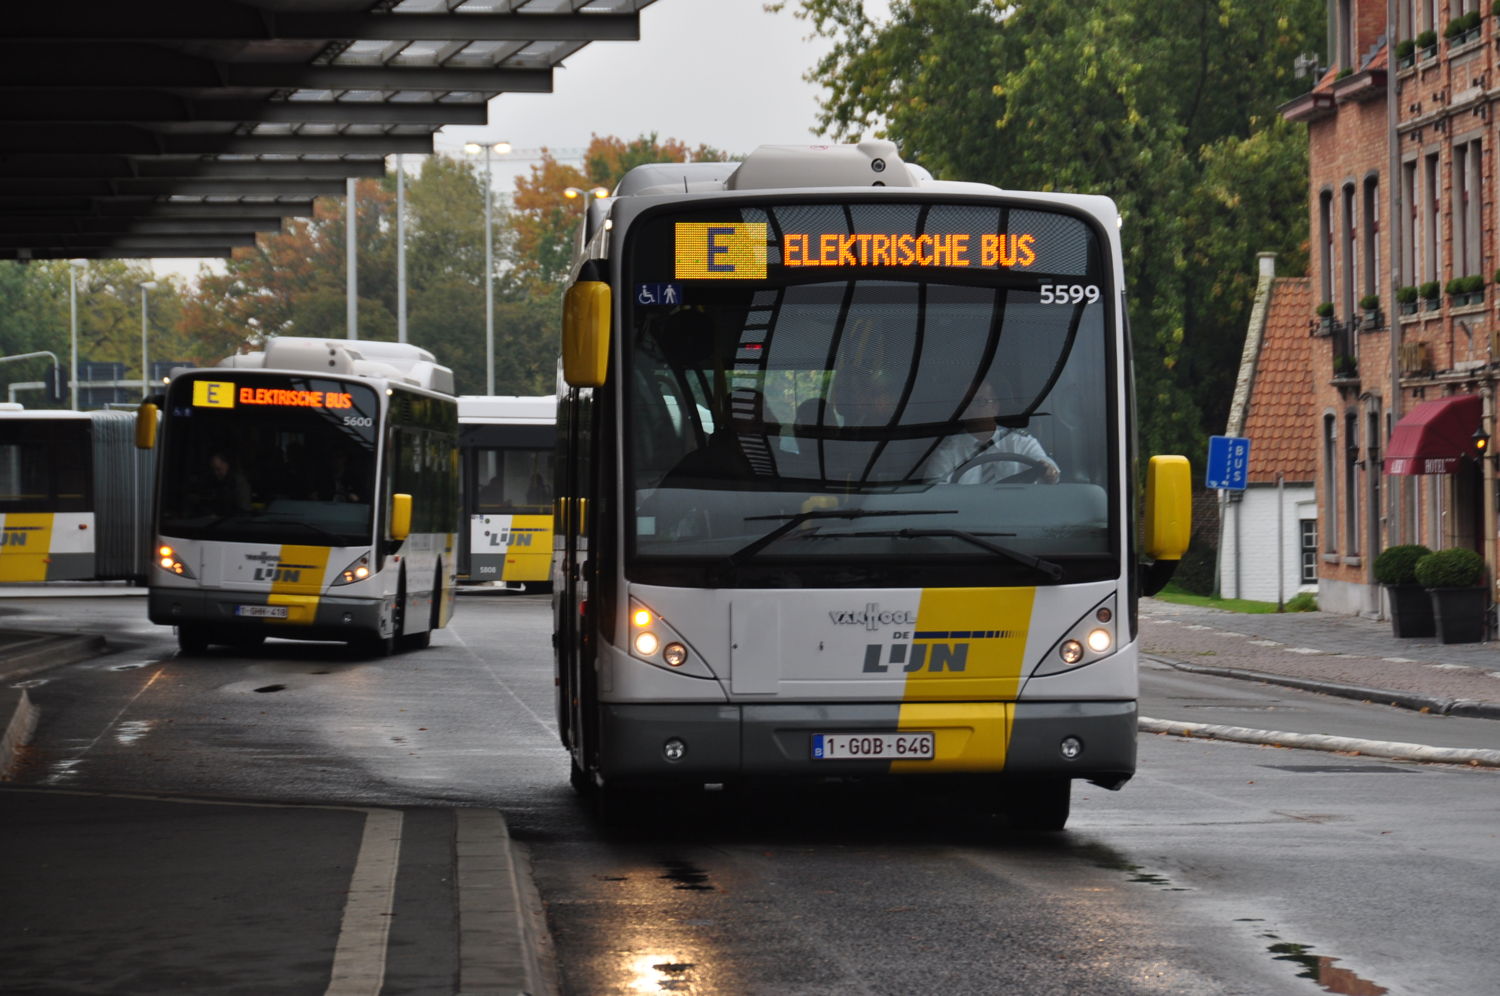 2 inductively charged, fully electric buses at the 't Zand square in Bruges.